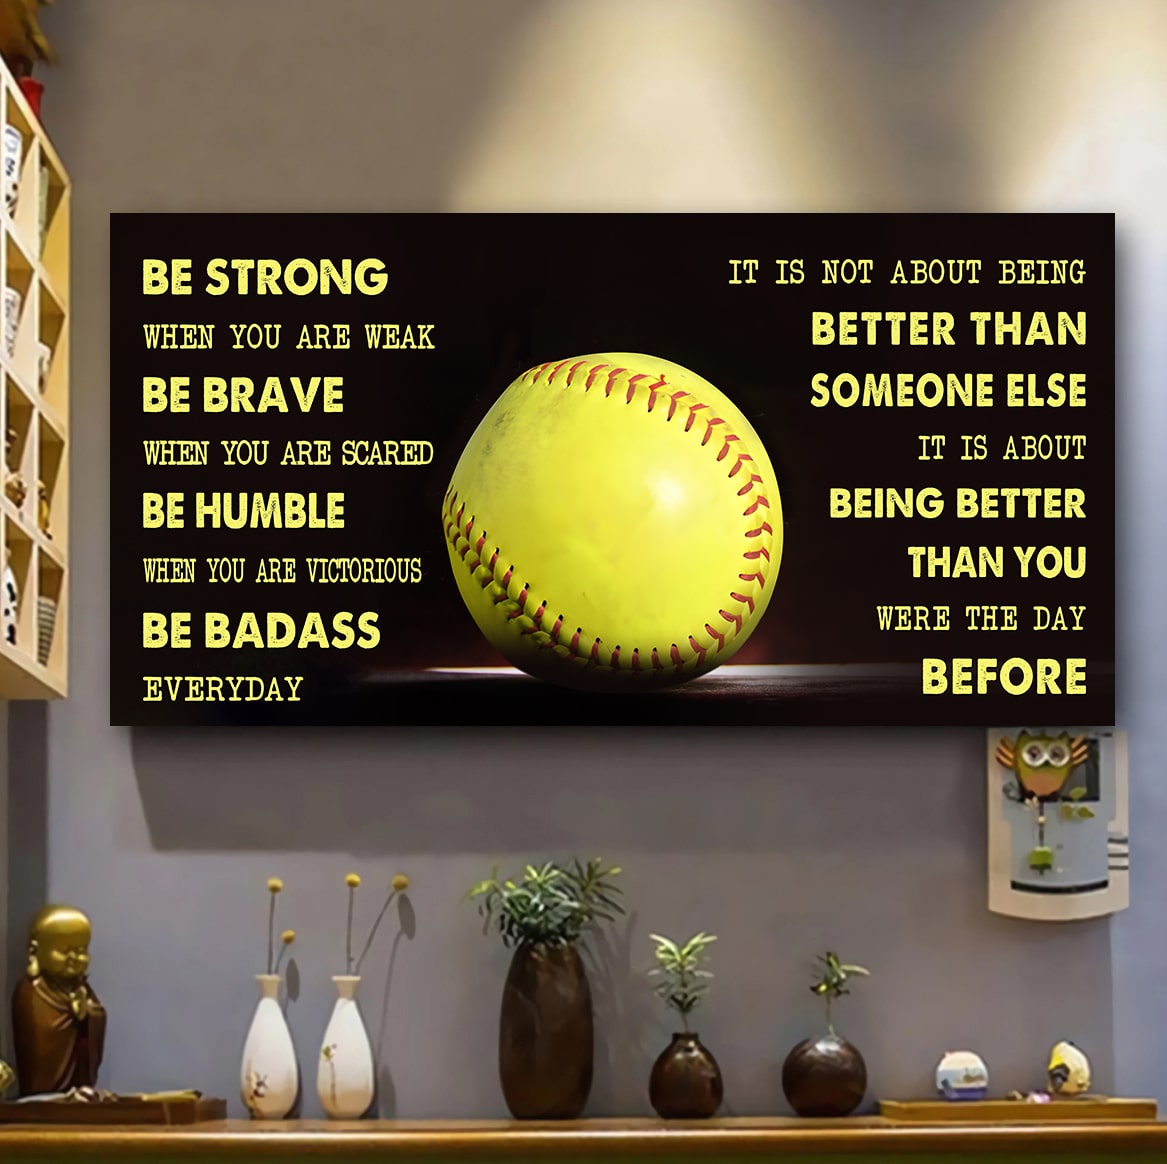 Softball canvas It Is Not About Being Better Than Someone Else - Be Strong When You Are Weak